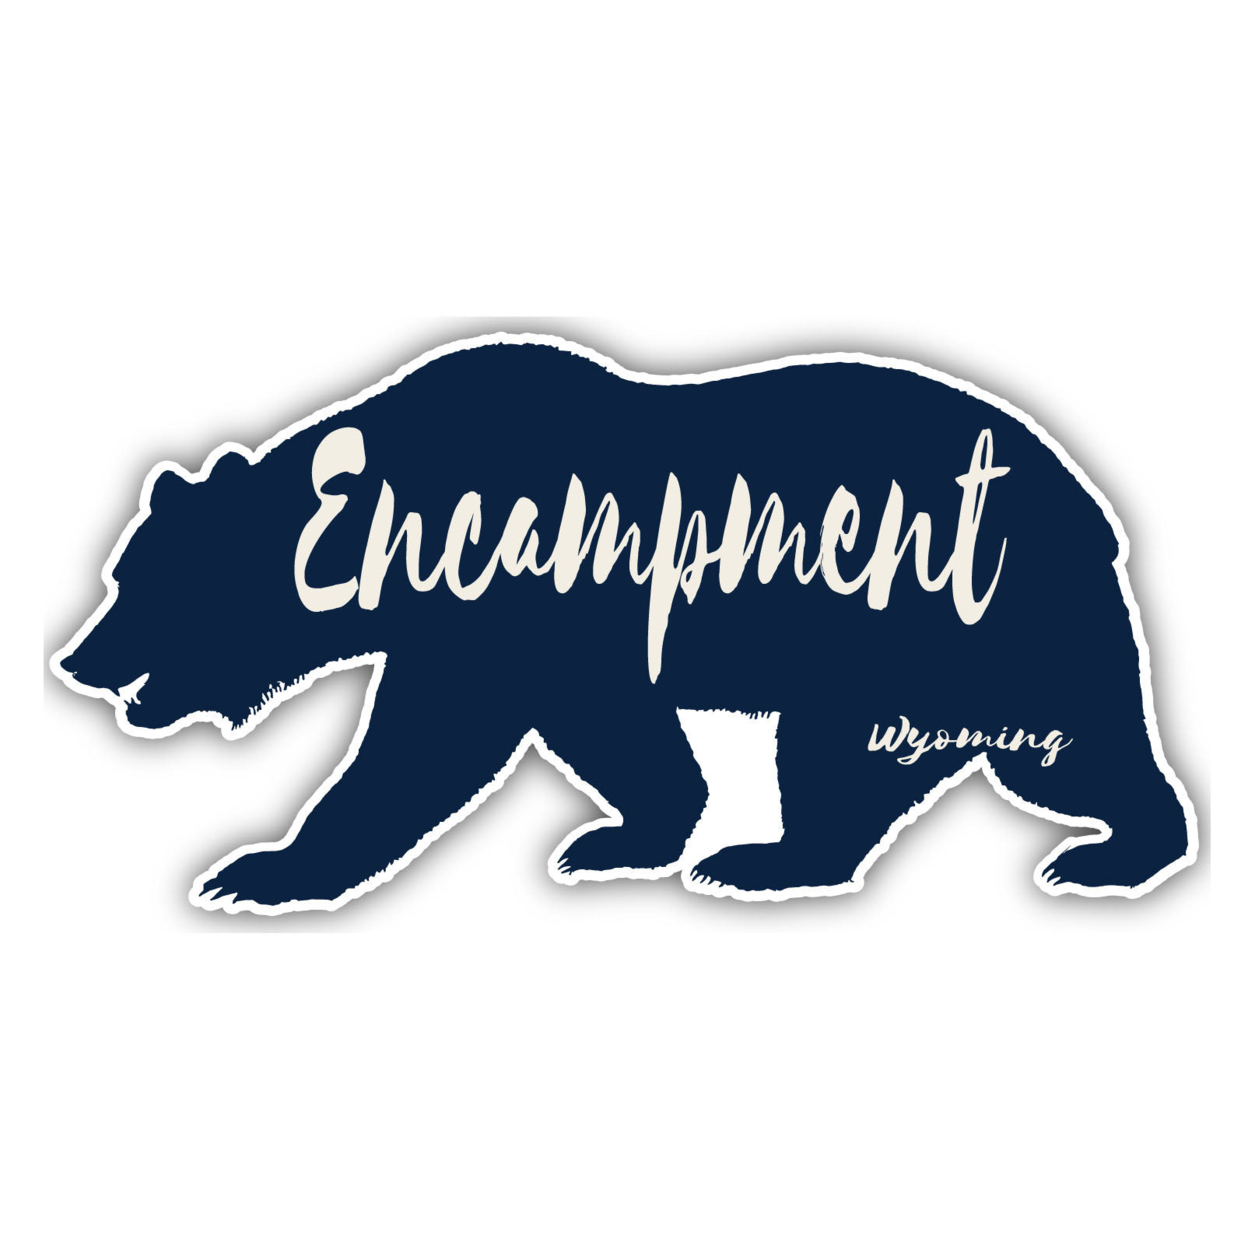 Encampment Wyoming Souvenir Decorative Stickers (Choose Theme And Size) - 4-Pack, 2-Inch, Tent